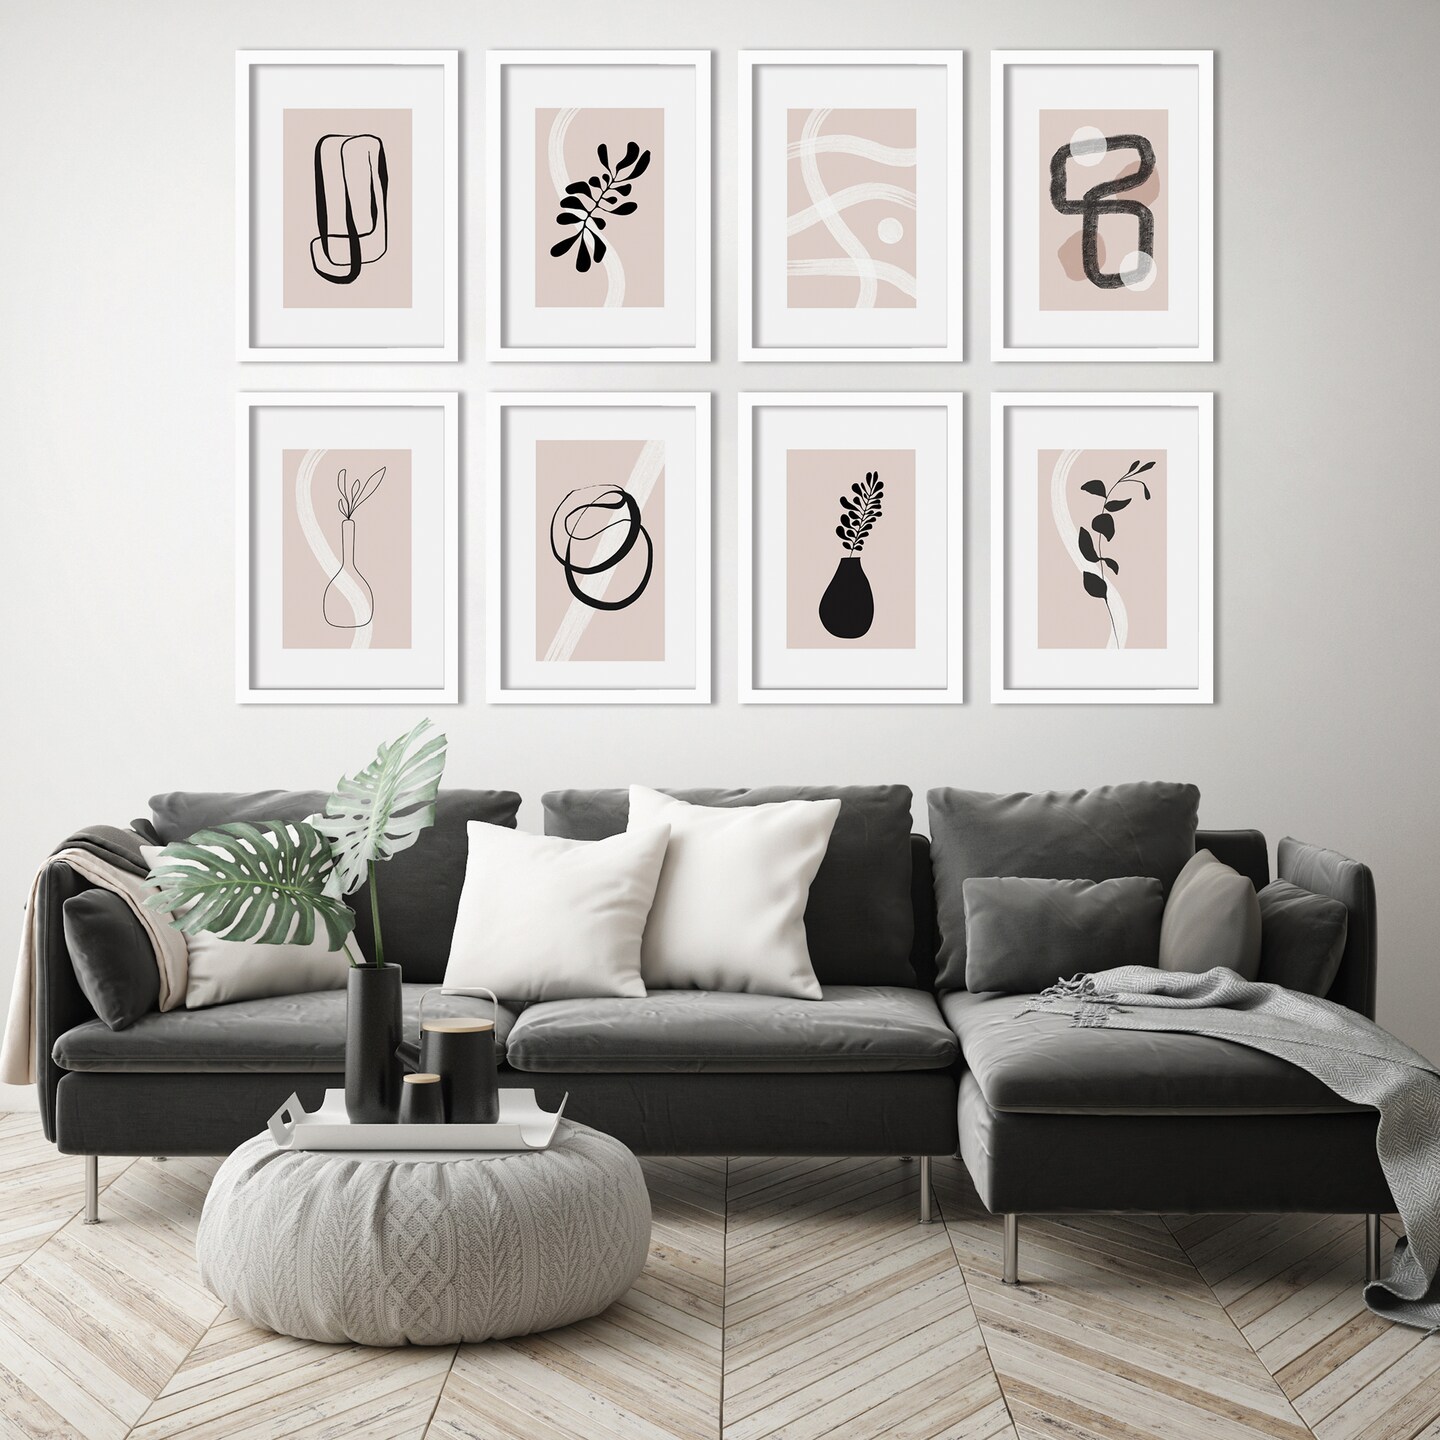 Blush and Black Abstract by Word Up Creative - 8 Piece Framed Art Set